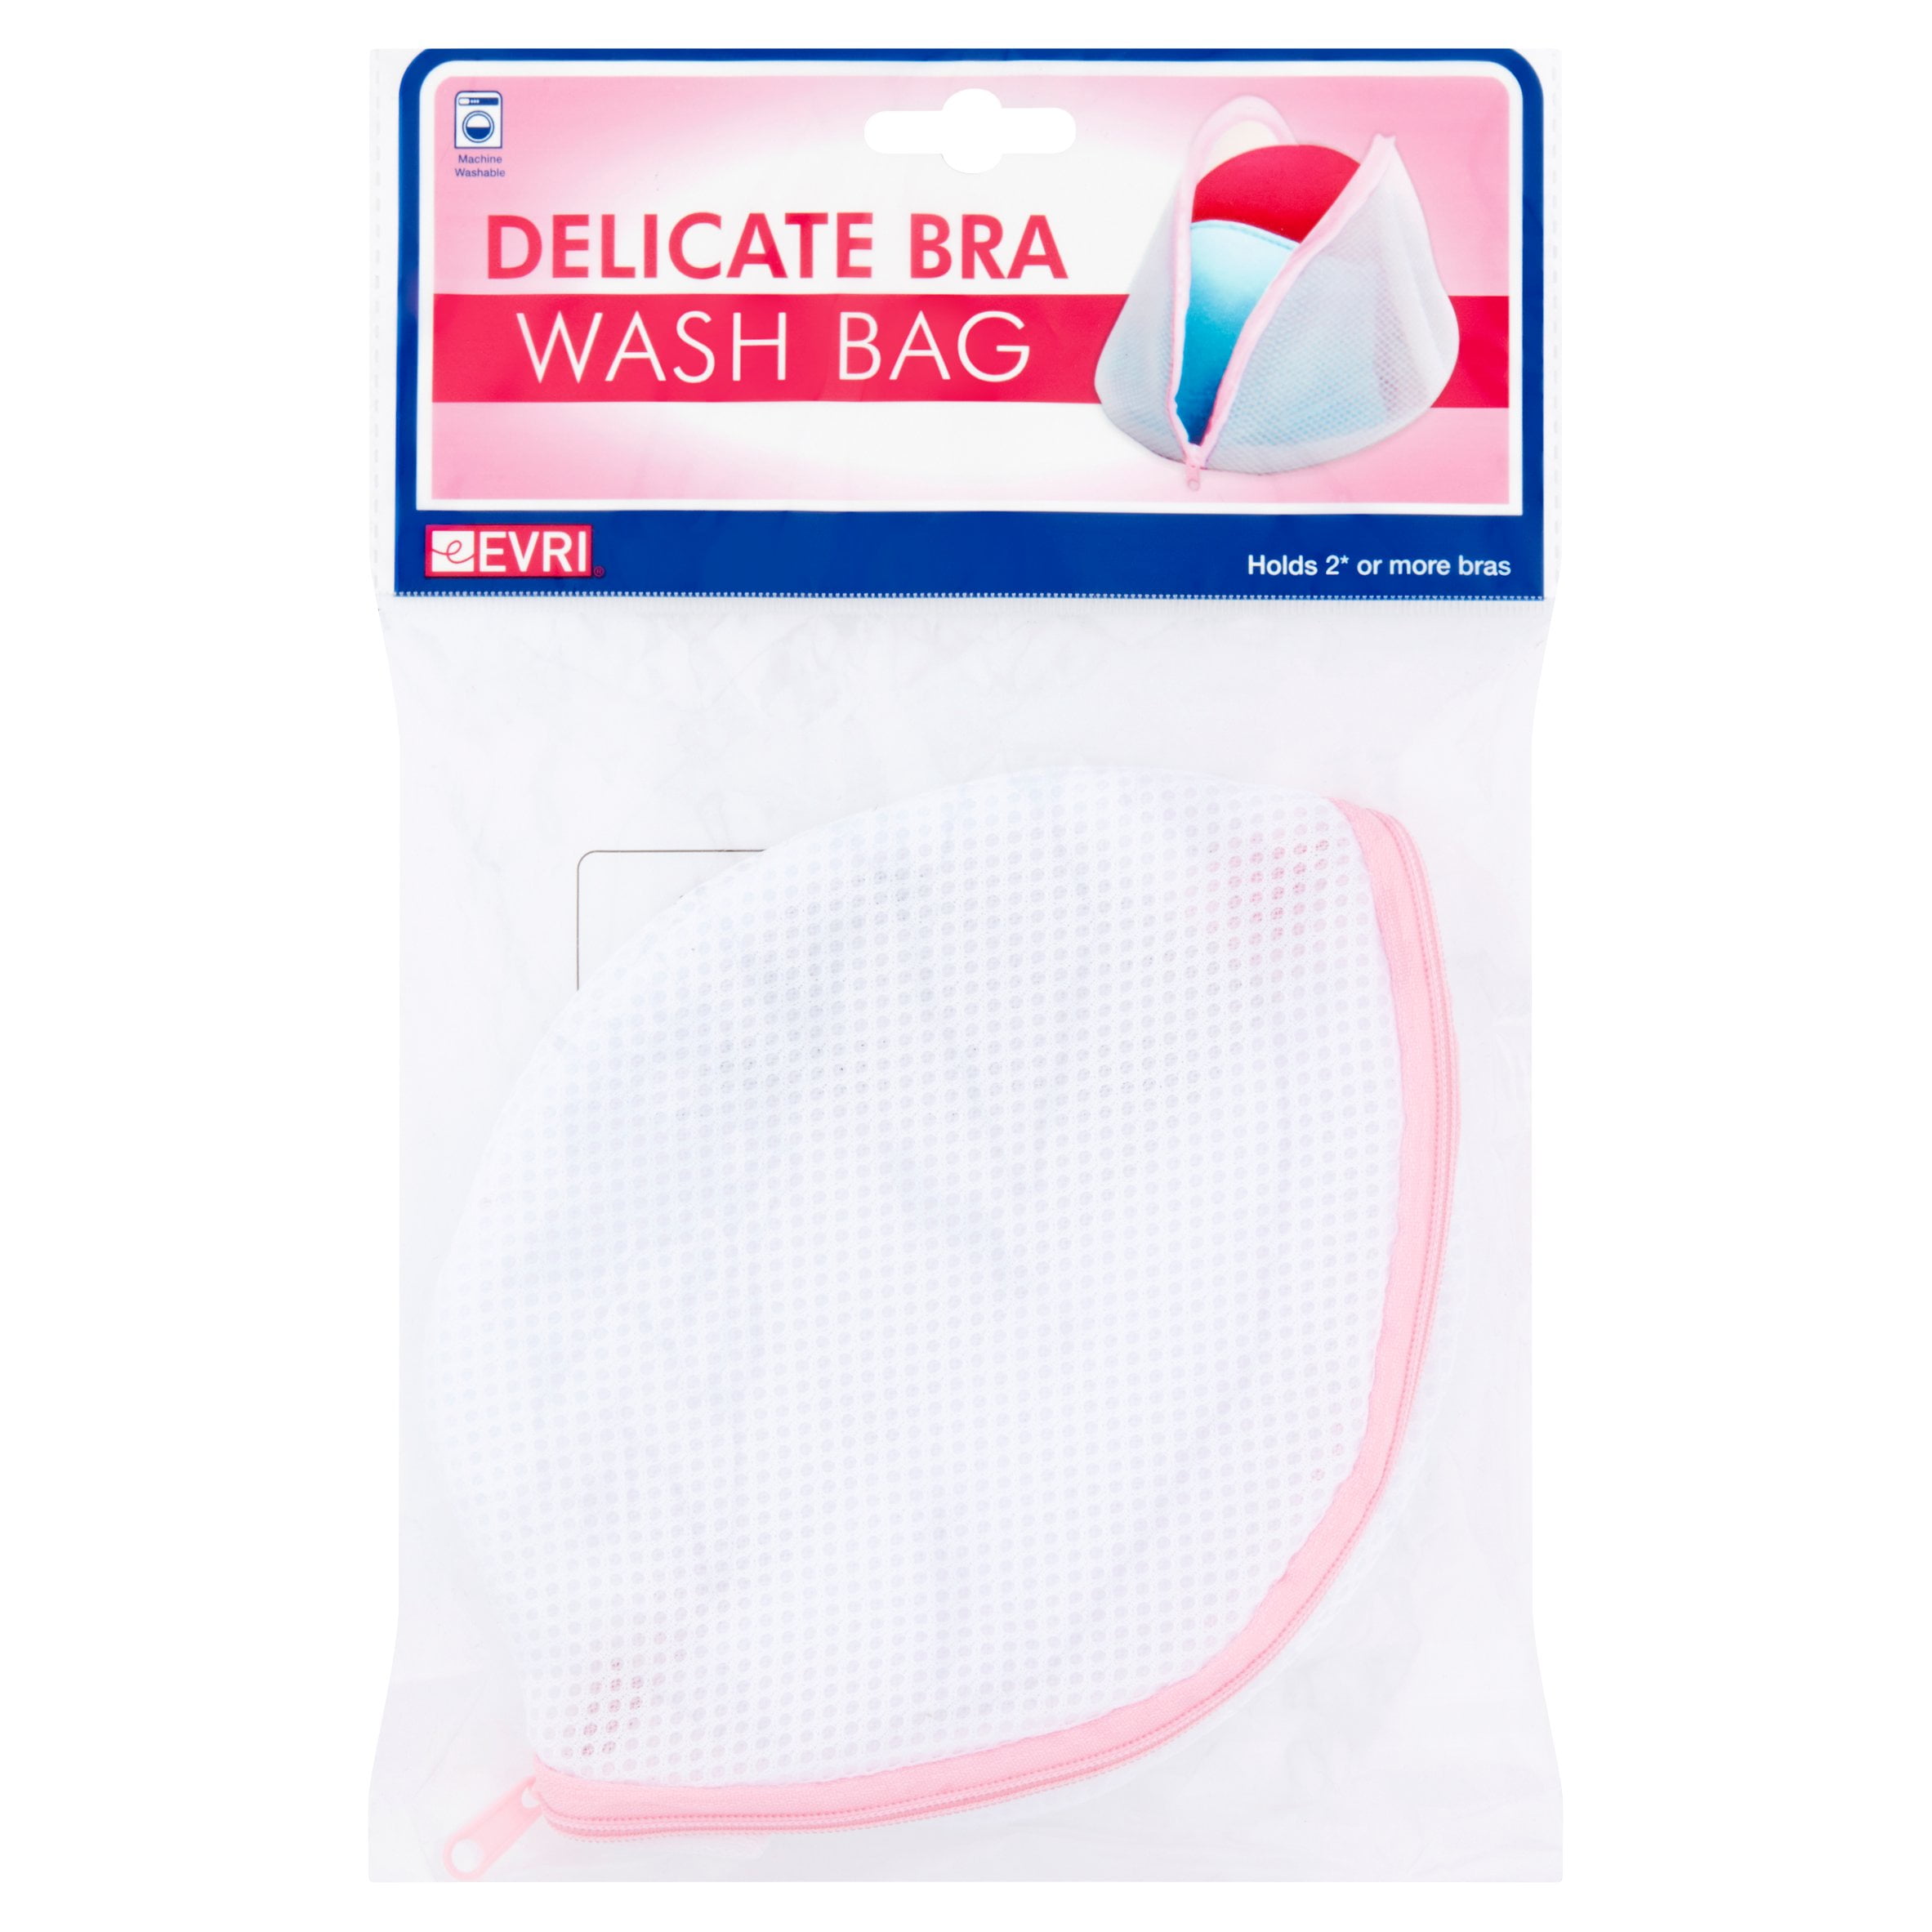 Bra Laundry Bag - Protects Bras While They Wash 5 PACK USA Seller 